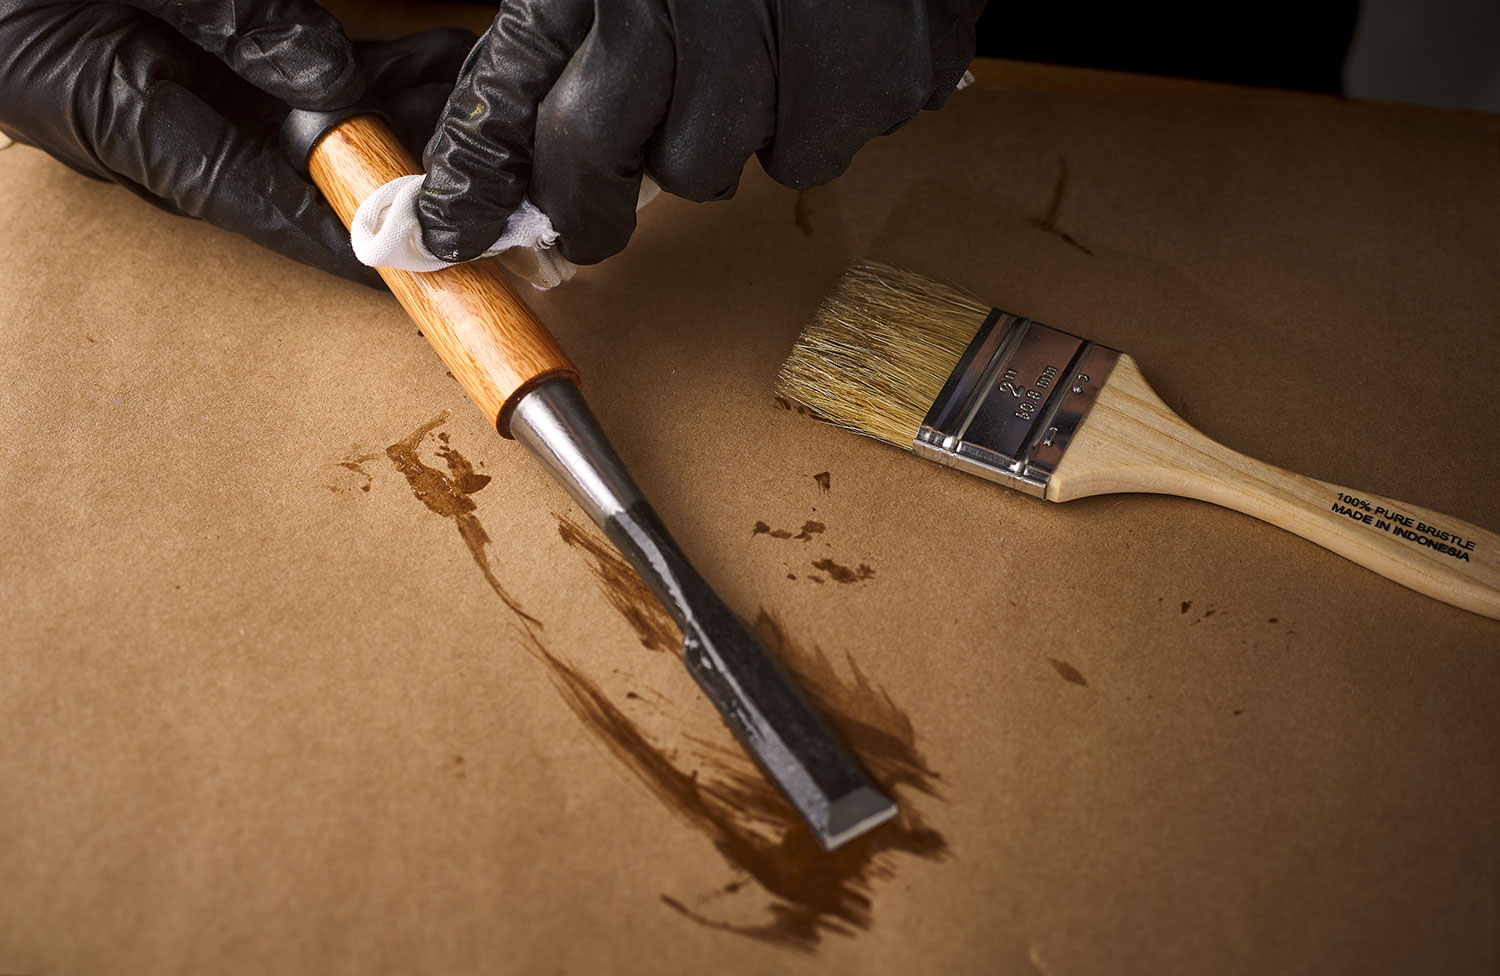 Removing the rust-preventive lacquer from the chisel.